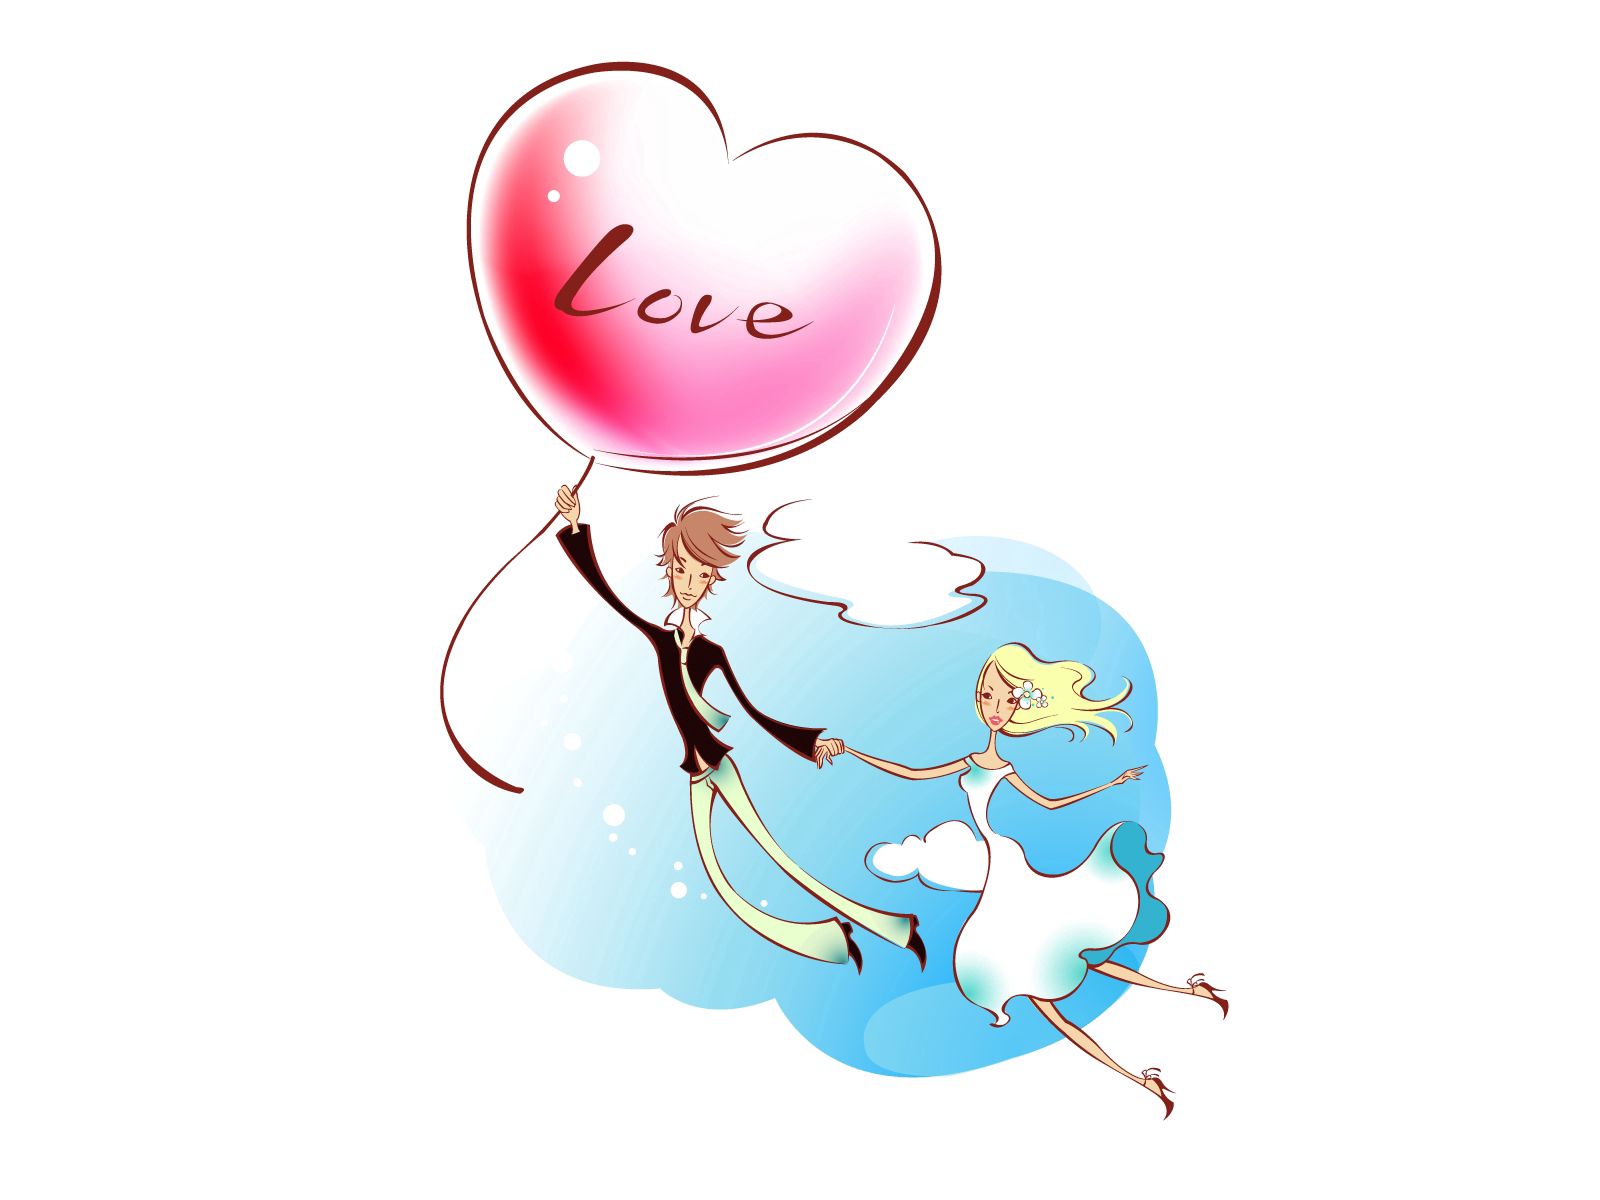 art, love, couple, pair, picture, drawing, flight, heart, happiness Image for desktop